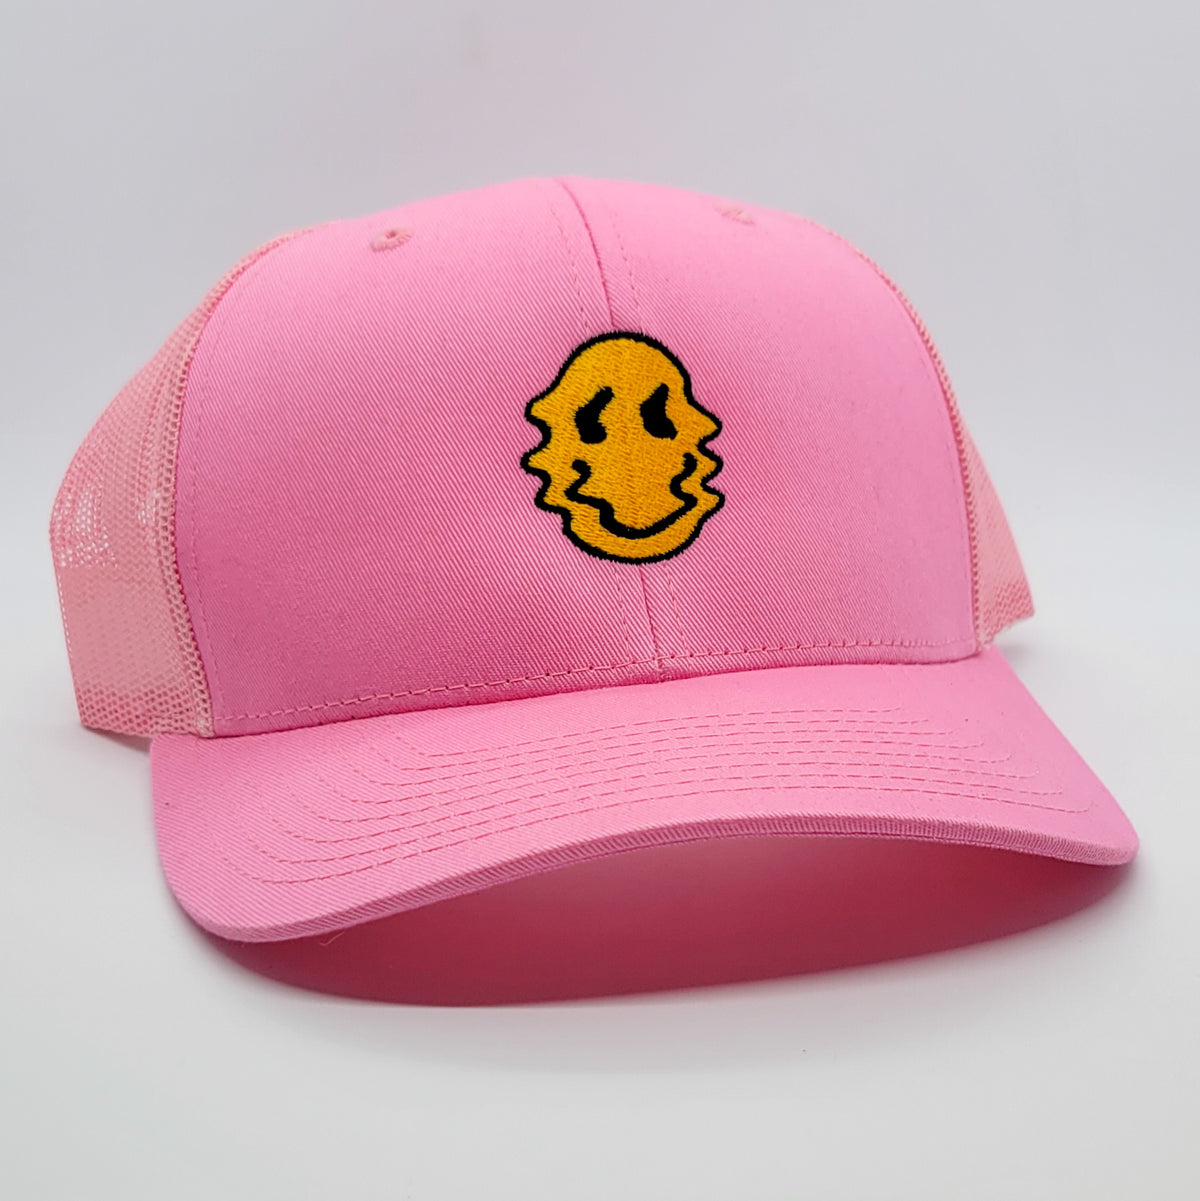 Stay Smiling Embroidered Pink Trucker Hat